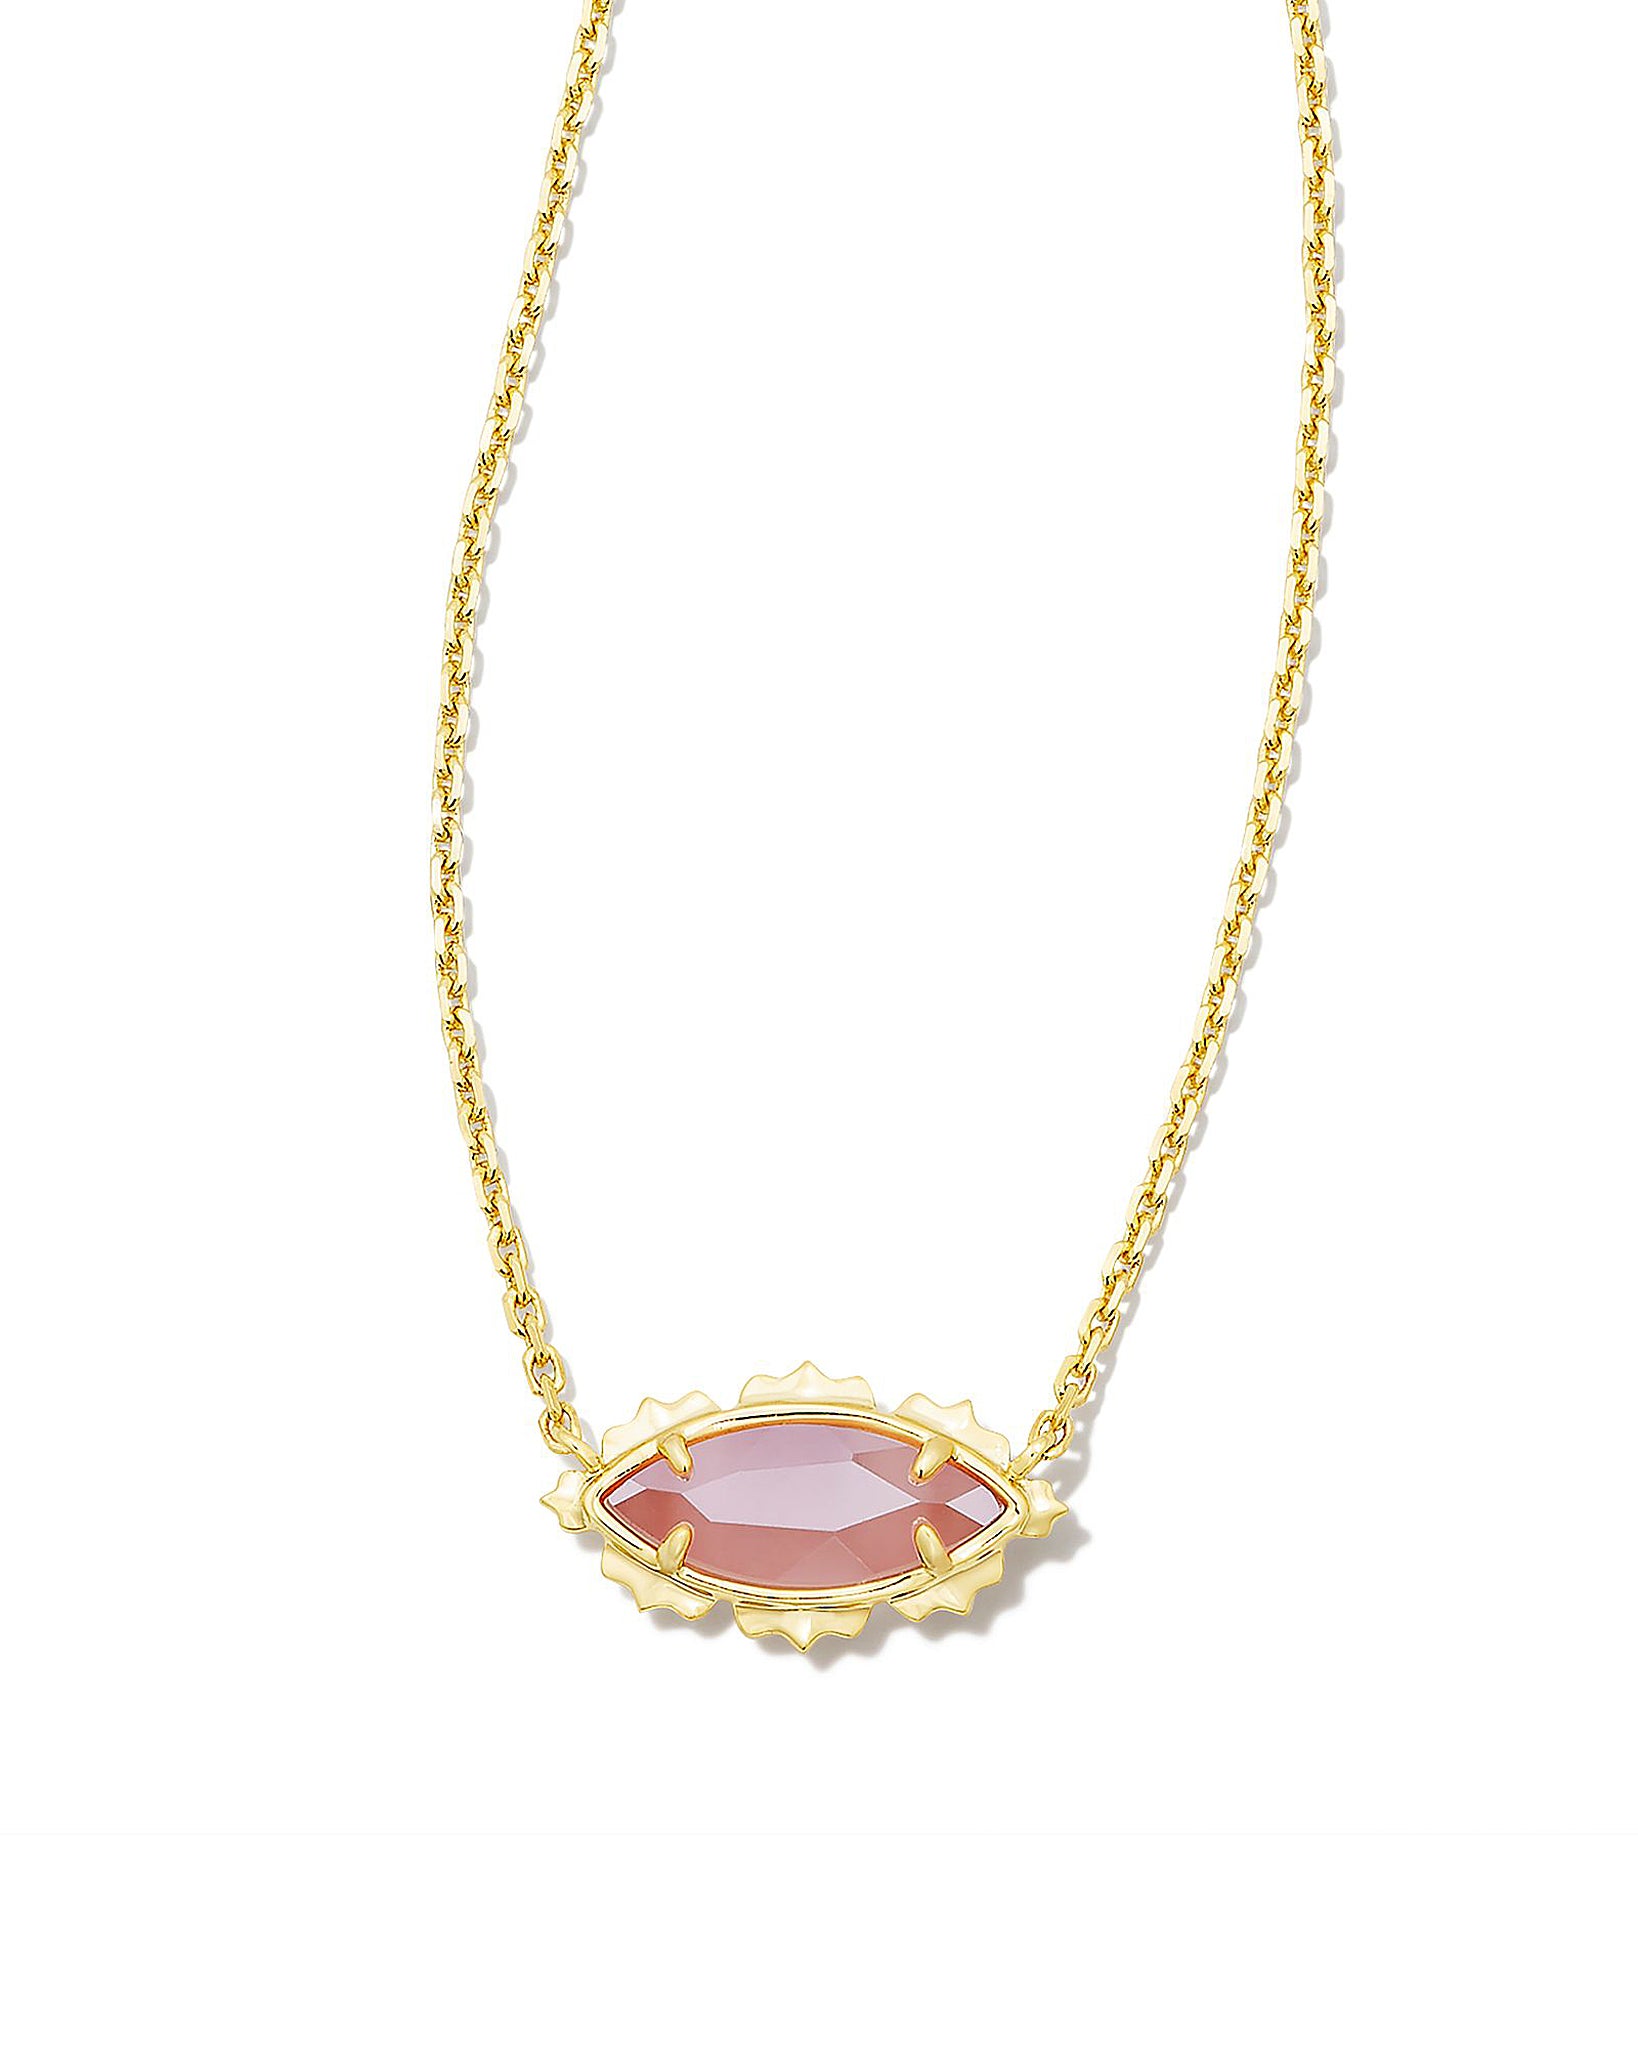 Kendra Scott Genevieve Marquise Pendant Necklace in Luster Plated Pink Cat's Eye and Gold